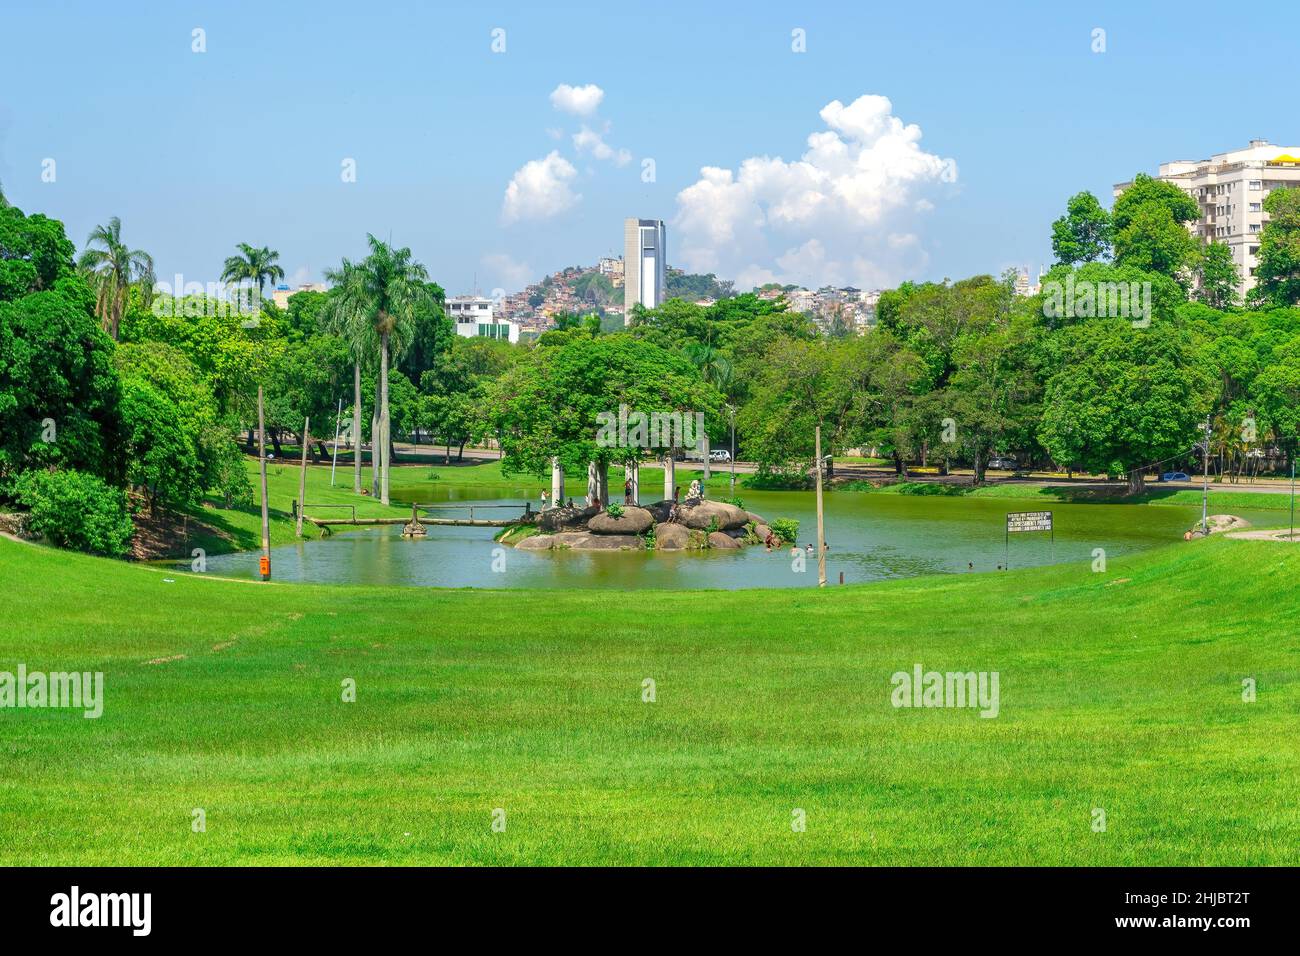 Beautiful garden general view in Quinta da Boa Vista which is a public park of great historical importance located in the Sao Cristovao neighbourhood. Stock Photo